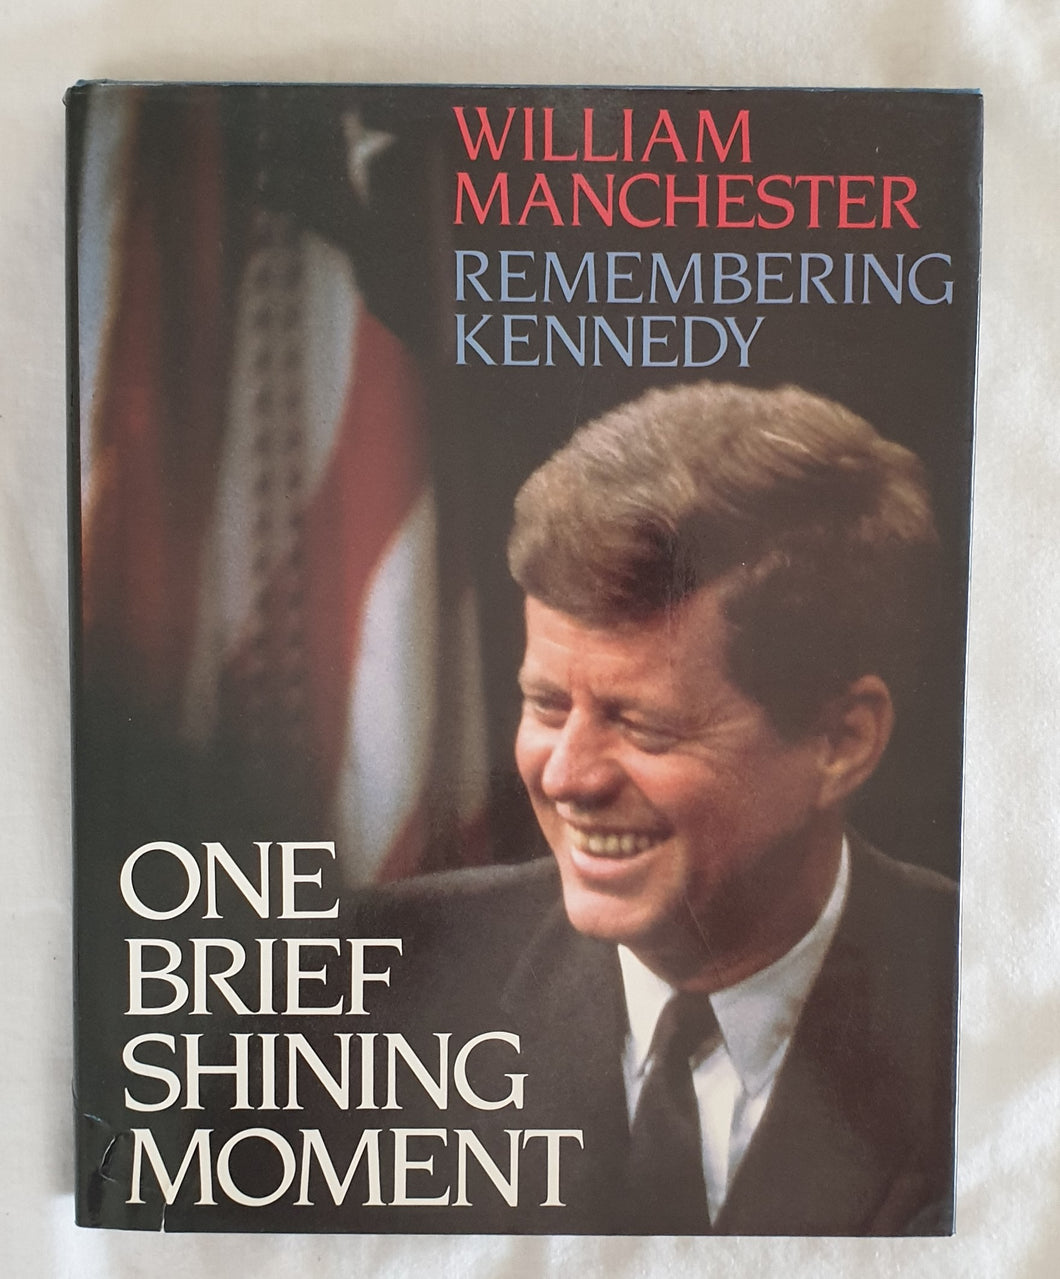 One Brief Shining Moment  Remembering Kennedy  by William Manchester